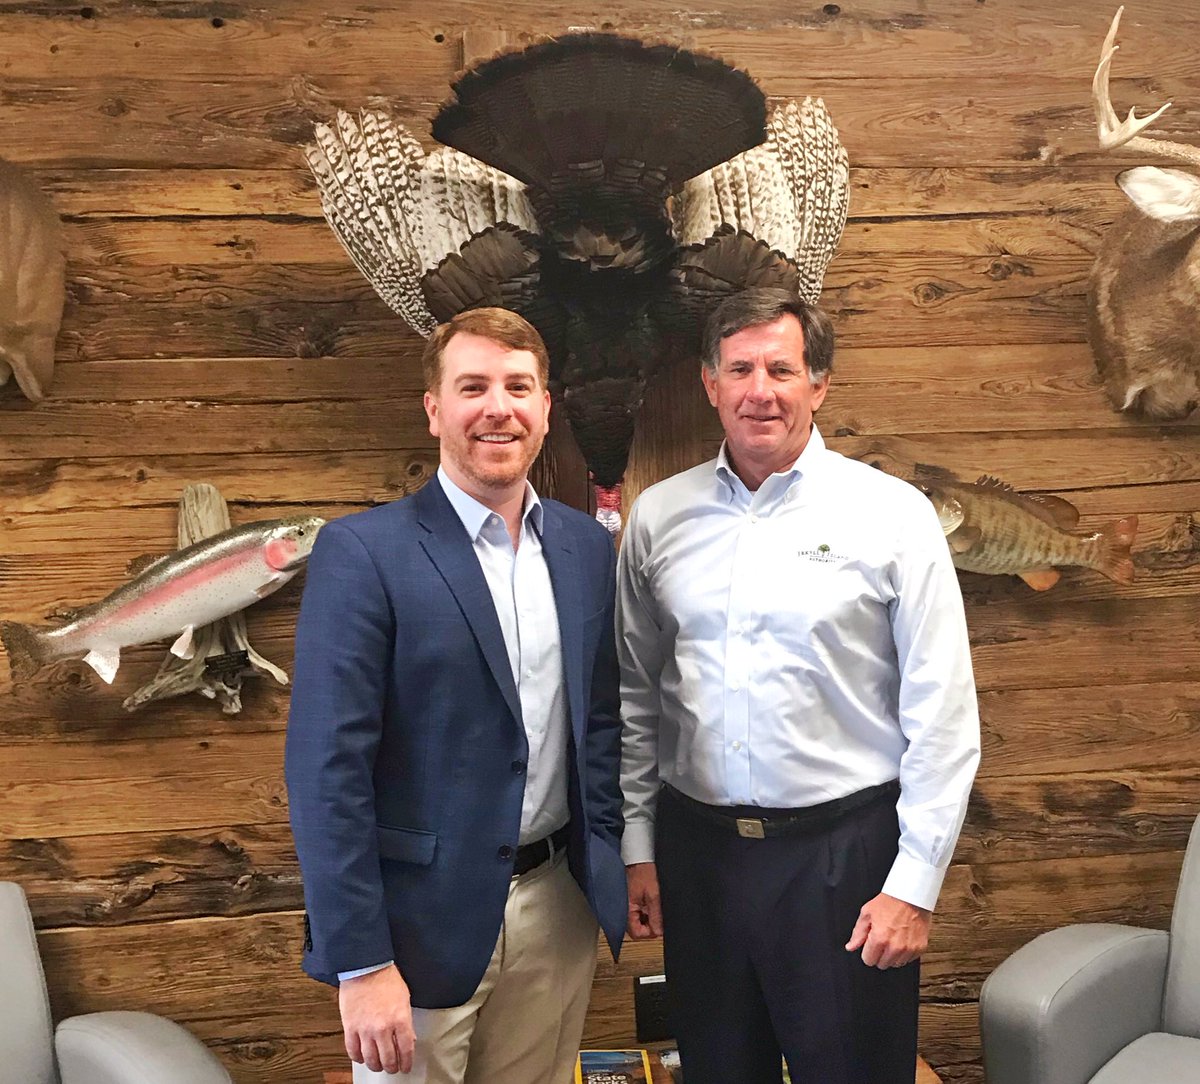 Great meeting with #Georgia DNR Commissioner Mark Williams discussing @NSSF initiatives like #nationalshootingsportsmonth and the #plusonemovement aimed at getting more people involved #hunting and the #shootingsports. #letsgoshooting #letsgohunting @GeorgiaWild